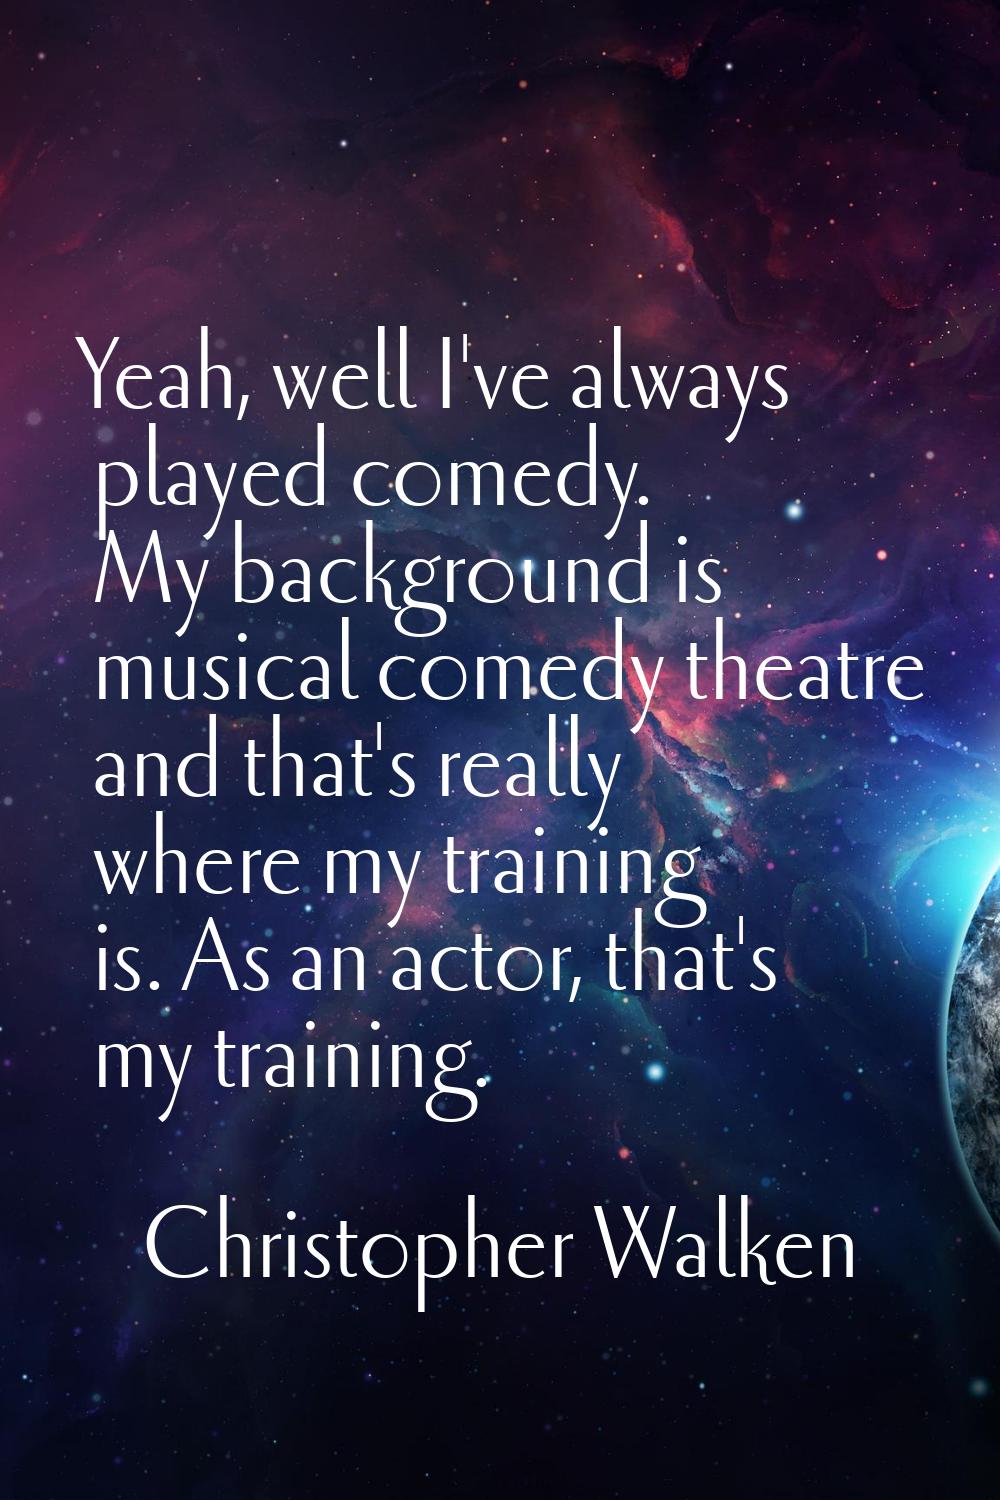 Yeah, well I've always played comedy. My background is musical comedy theatre and that's really whe